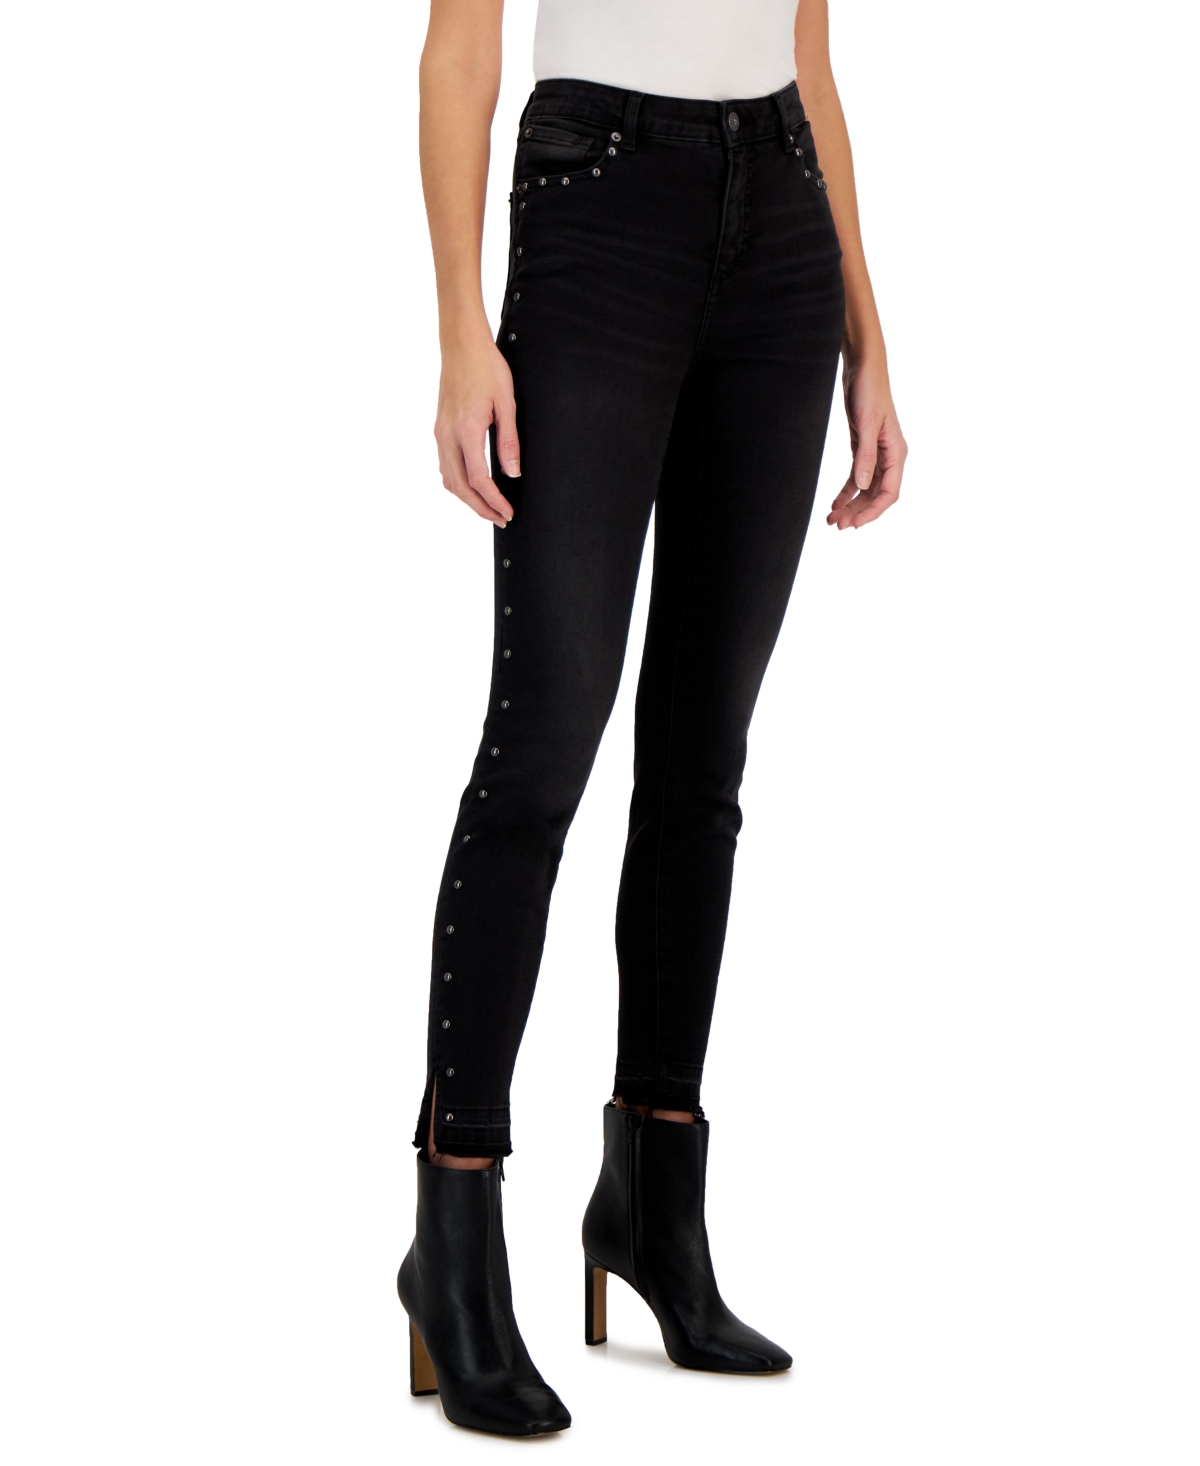  Inc International Concepts Women's High-Rise Studded Skinny Jeans, Created for Macy's